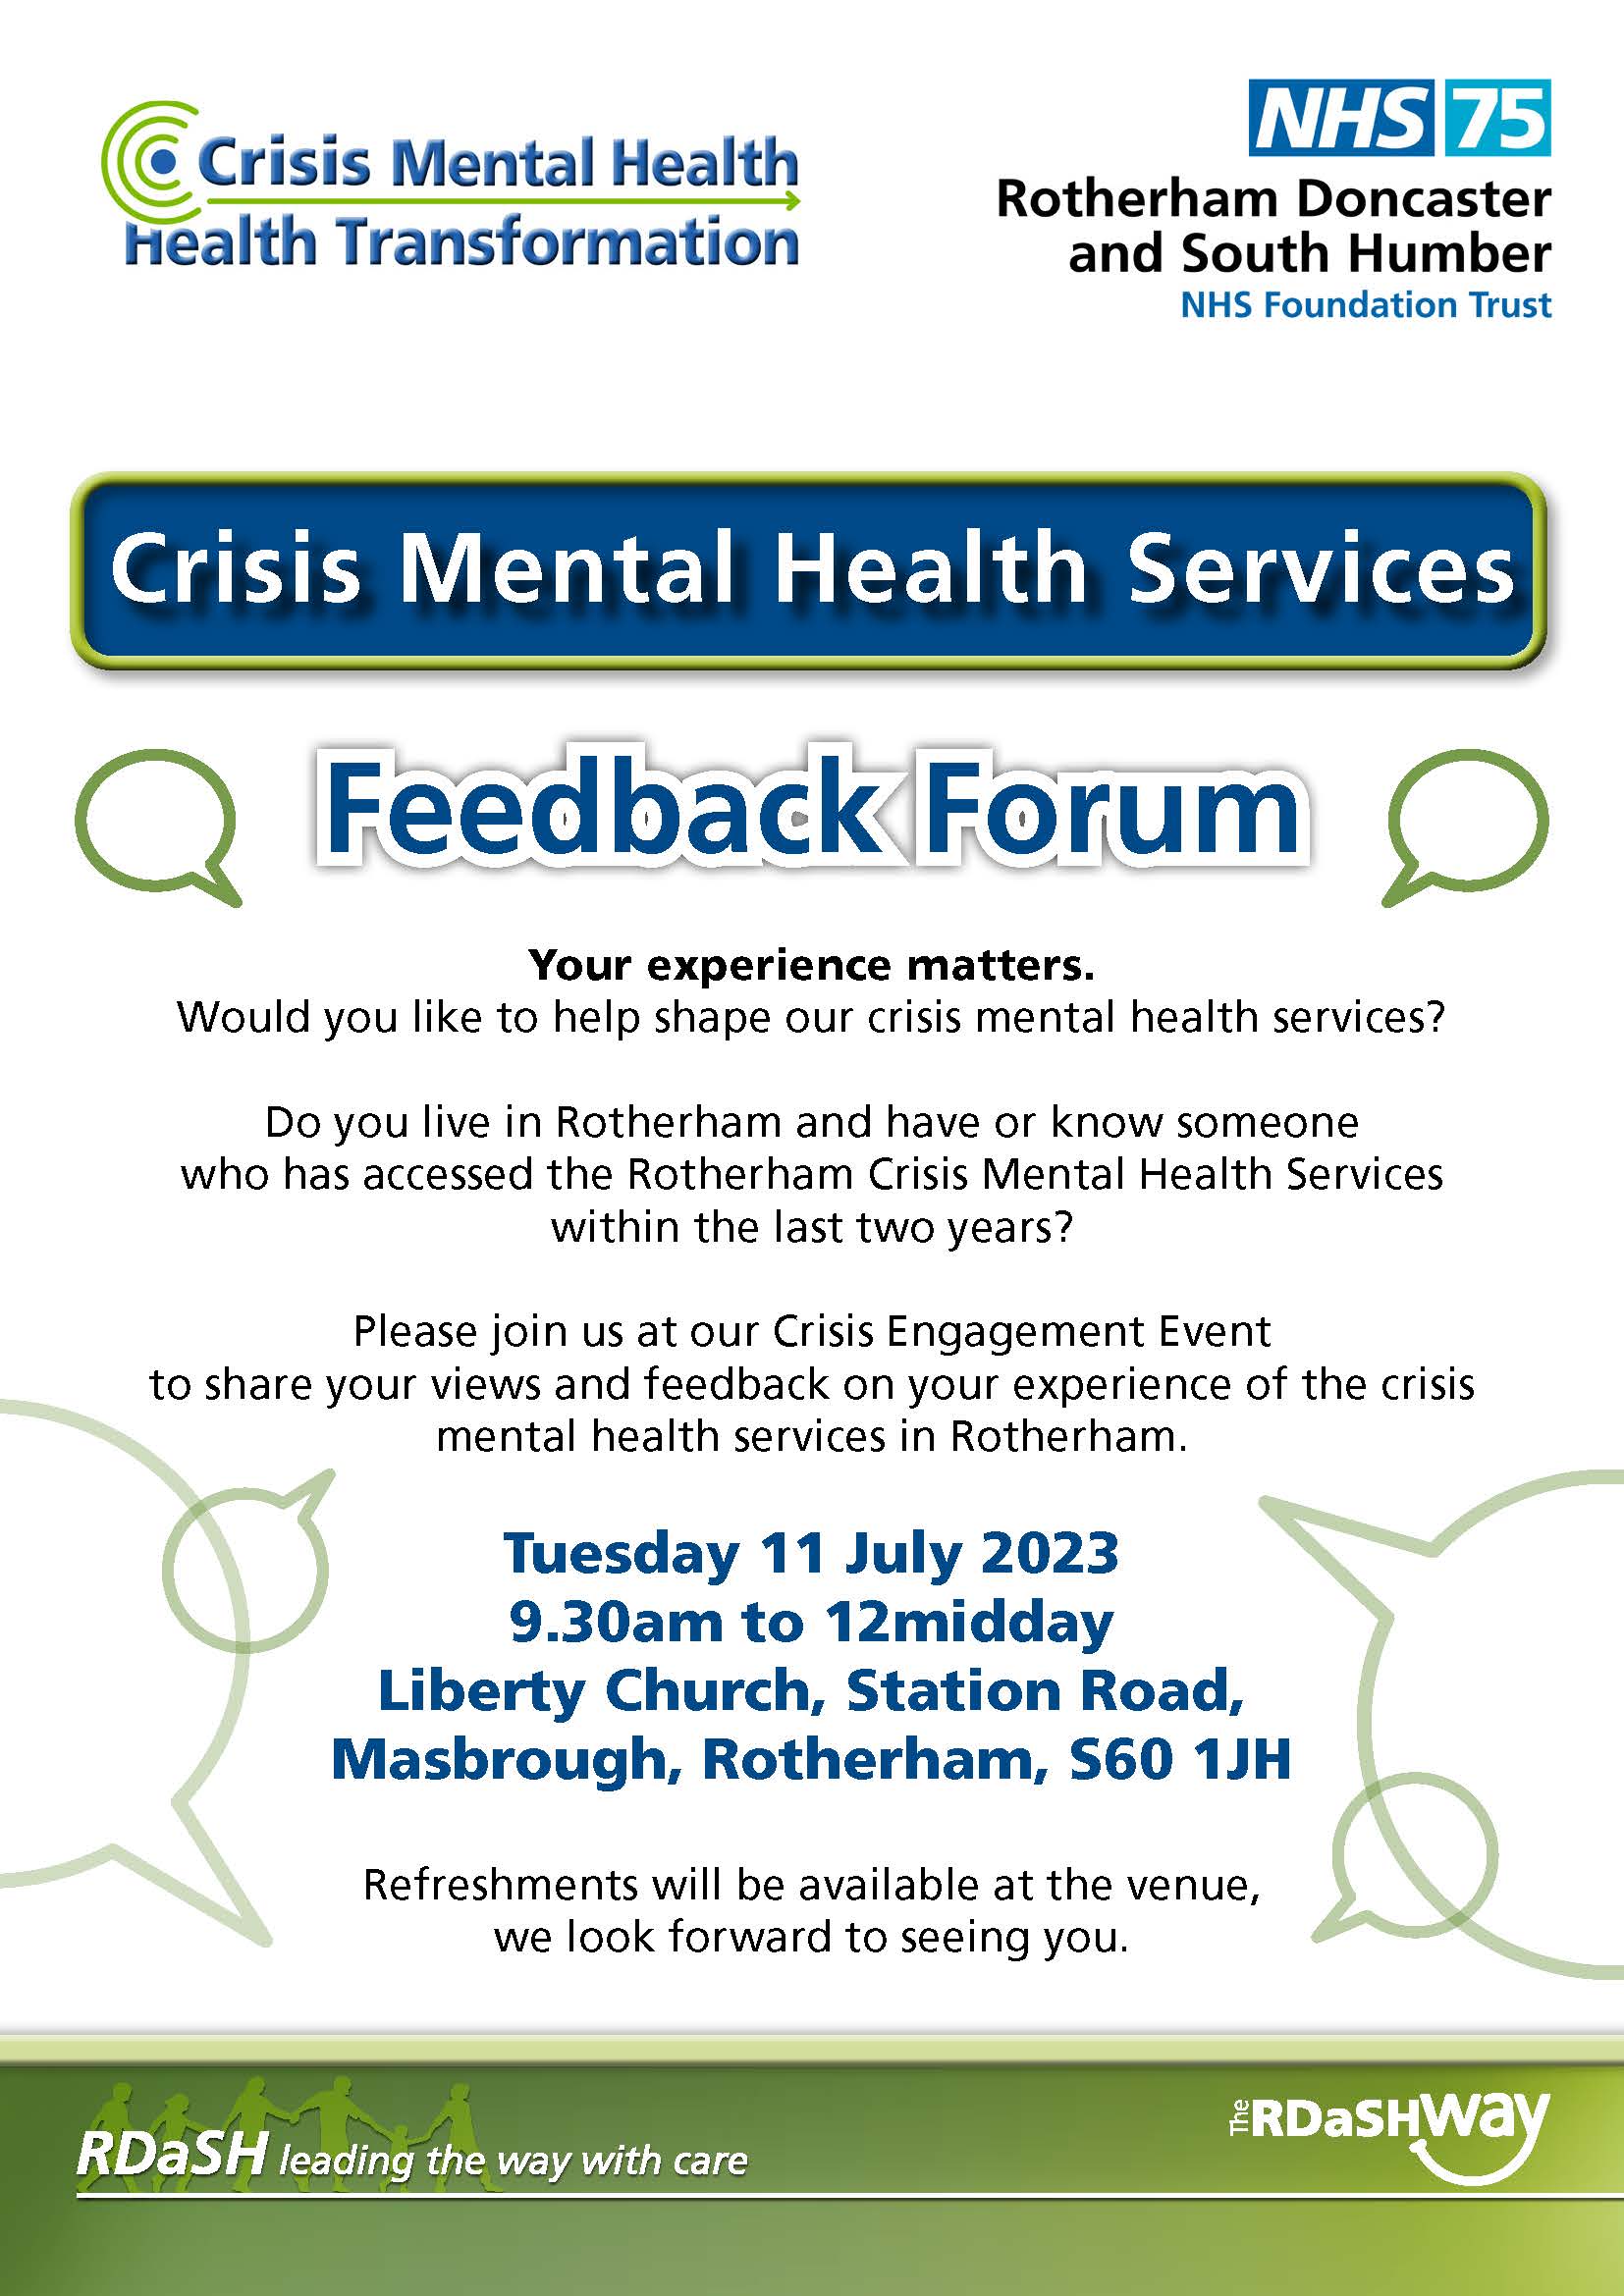 Crisis Mental Health Services
Your experience matters.
Would you like to help shape our crisis mental health services?
Do you live in Rotherham and have or know someone
who has accessed the Rotherham Crisis Mental Health Services
within the last two years?
Please join us at our Crisis Engagement Event
to share your views and feedback on your experience of the crisis
mental health services in Rotherham.
Tuesday 11 July 2023
9.30am to 12midday
Liberty Church, Station Road,
Masbrough, Rotherham, S60 1JH
Refreshments will be available at the venue,
we look forward to seeing you.